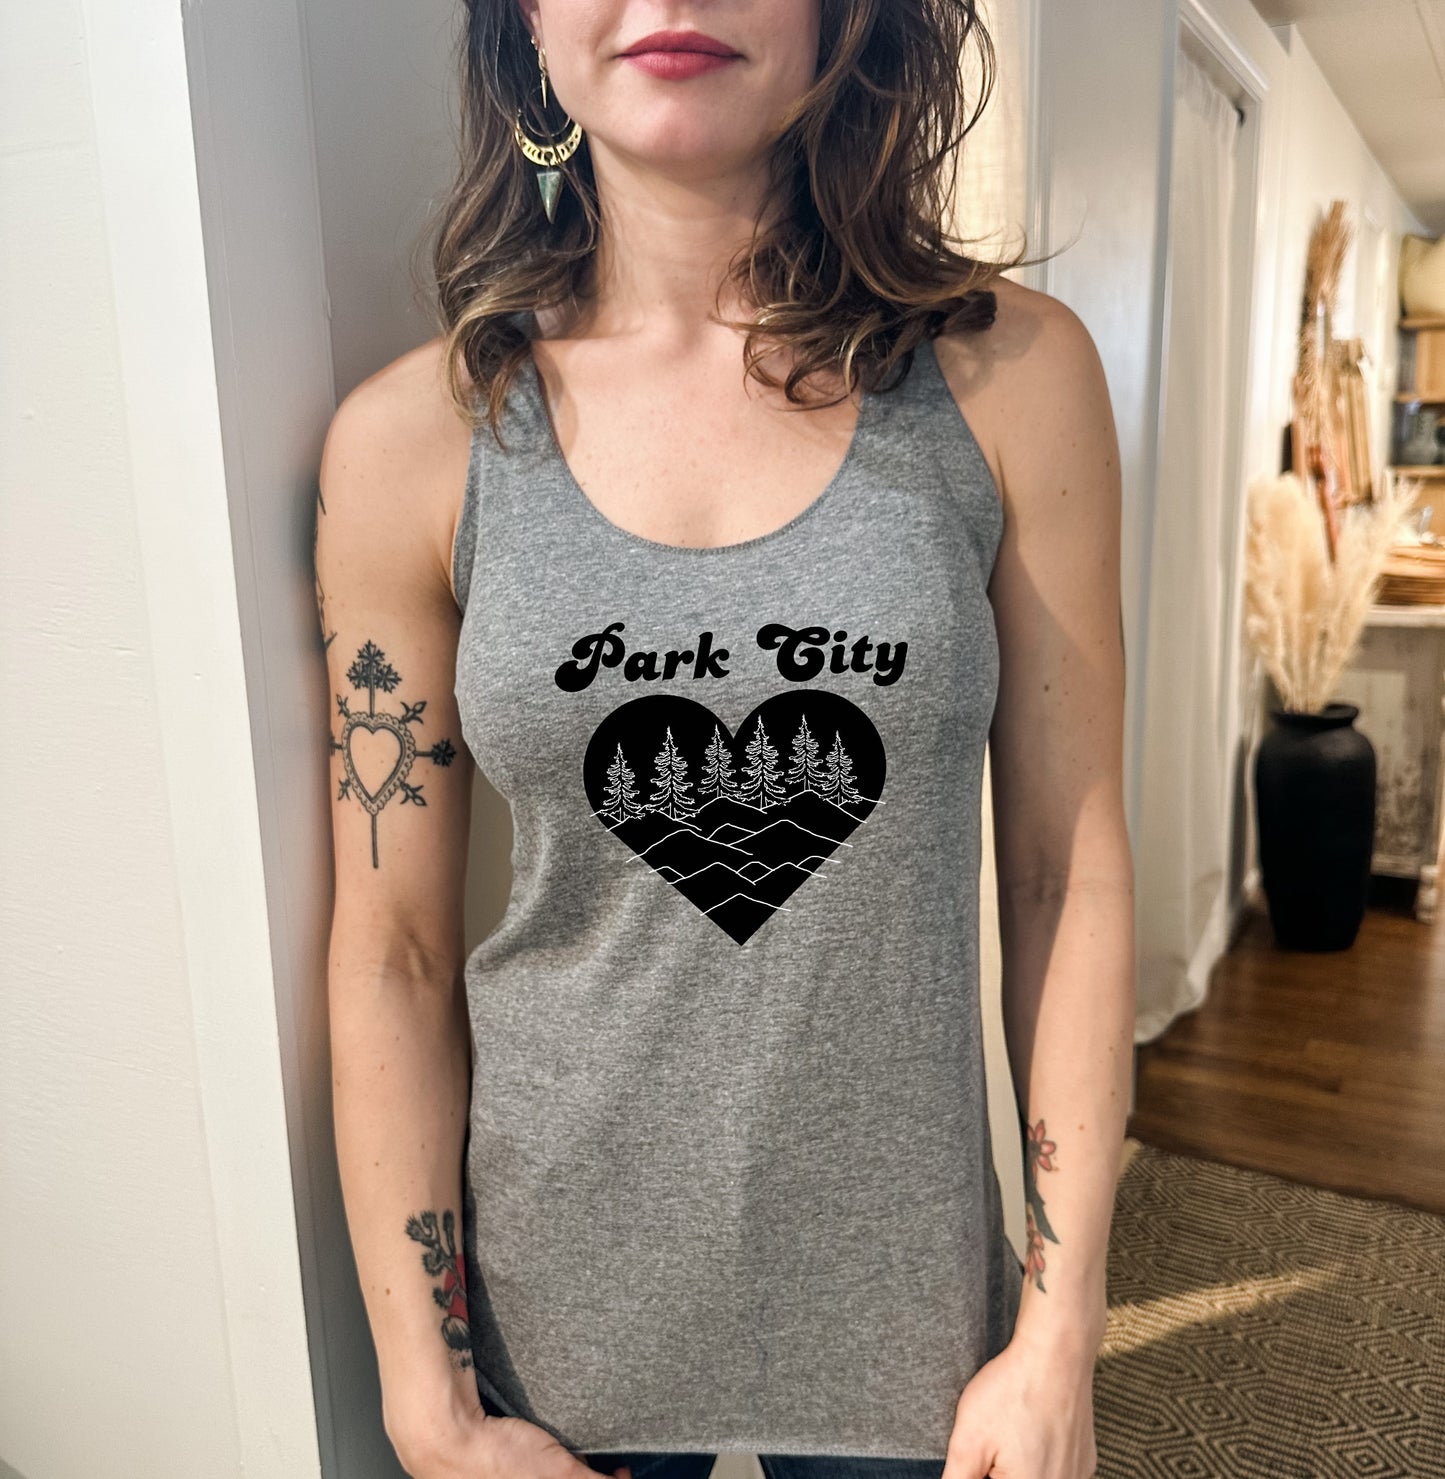 a woman wearing a tank top that says park city